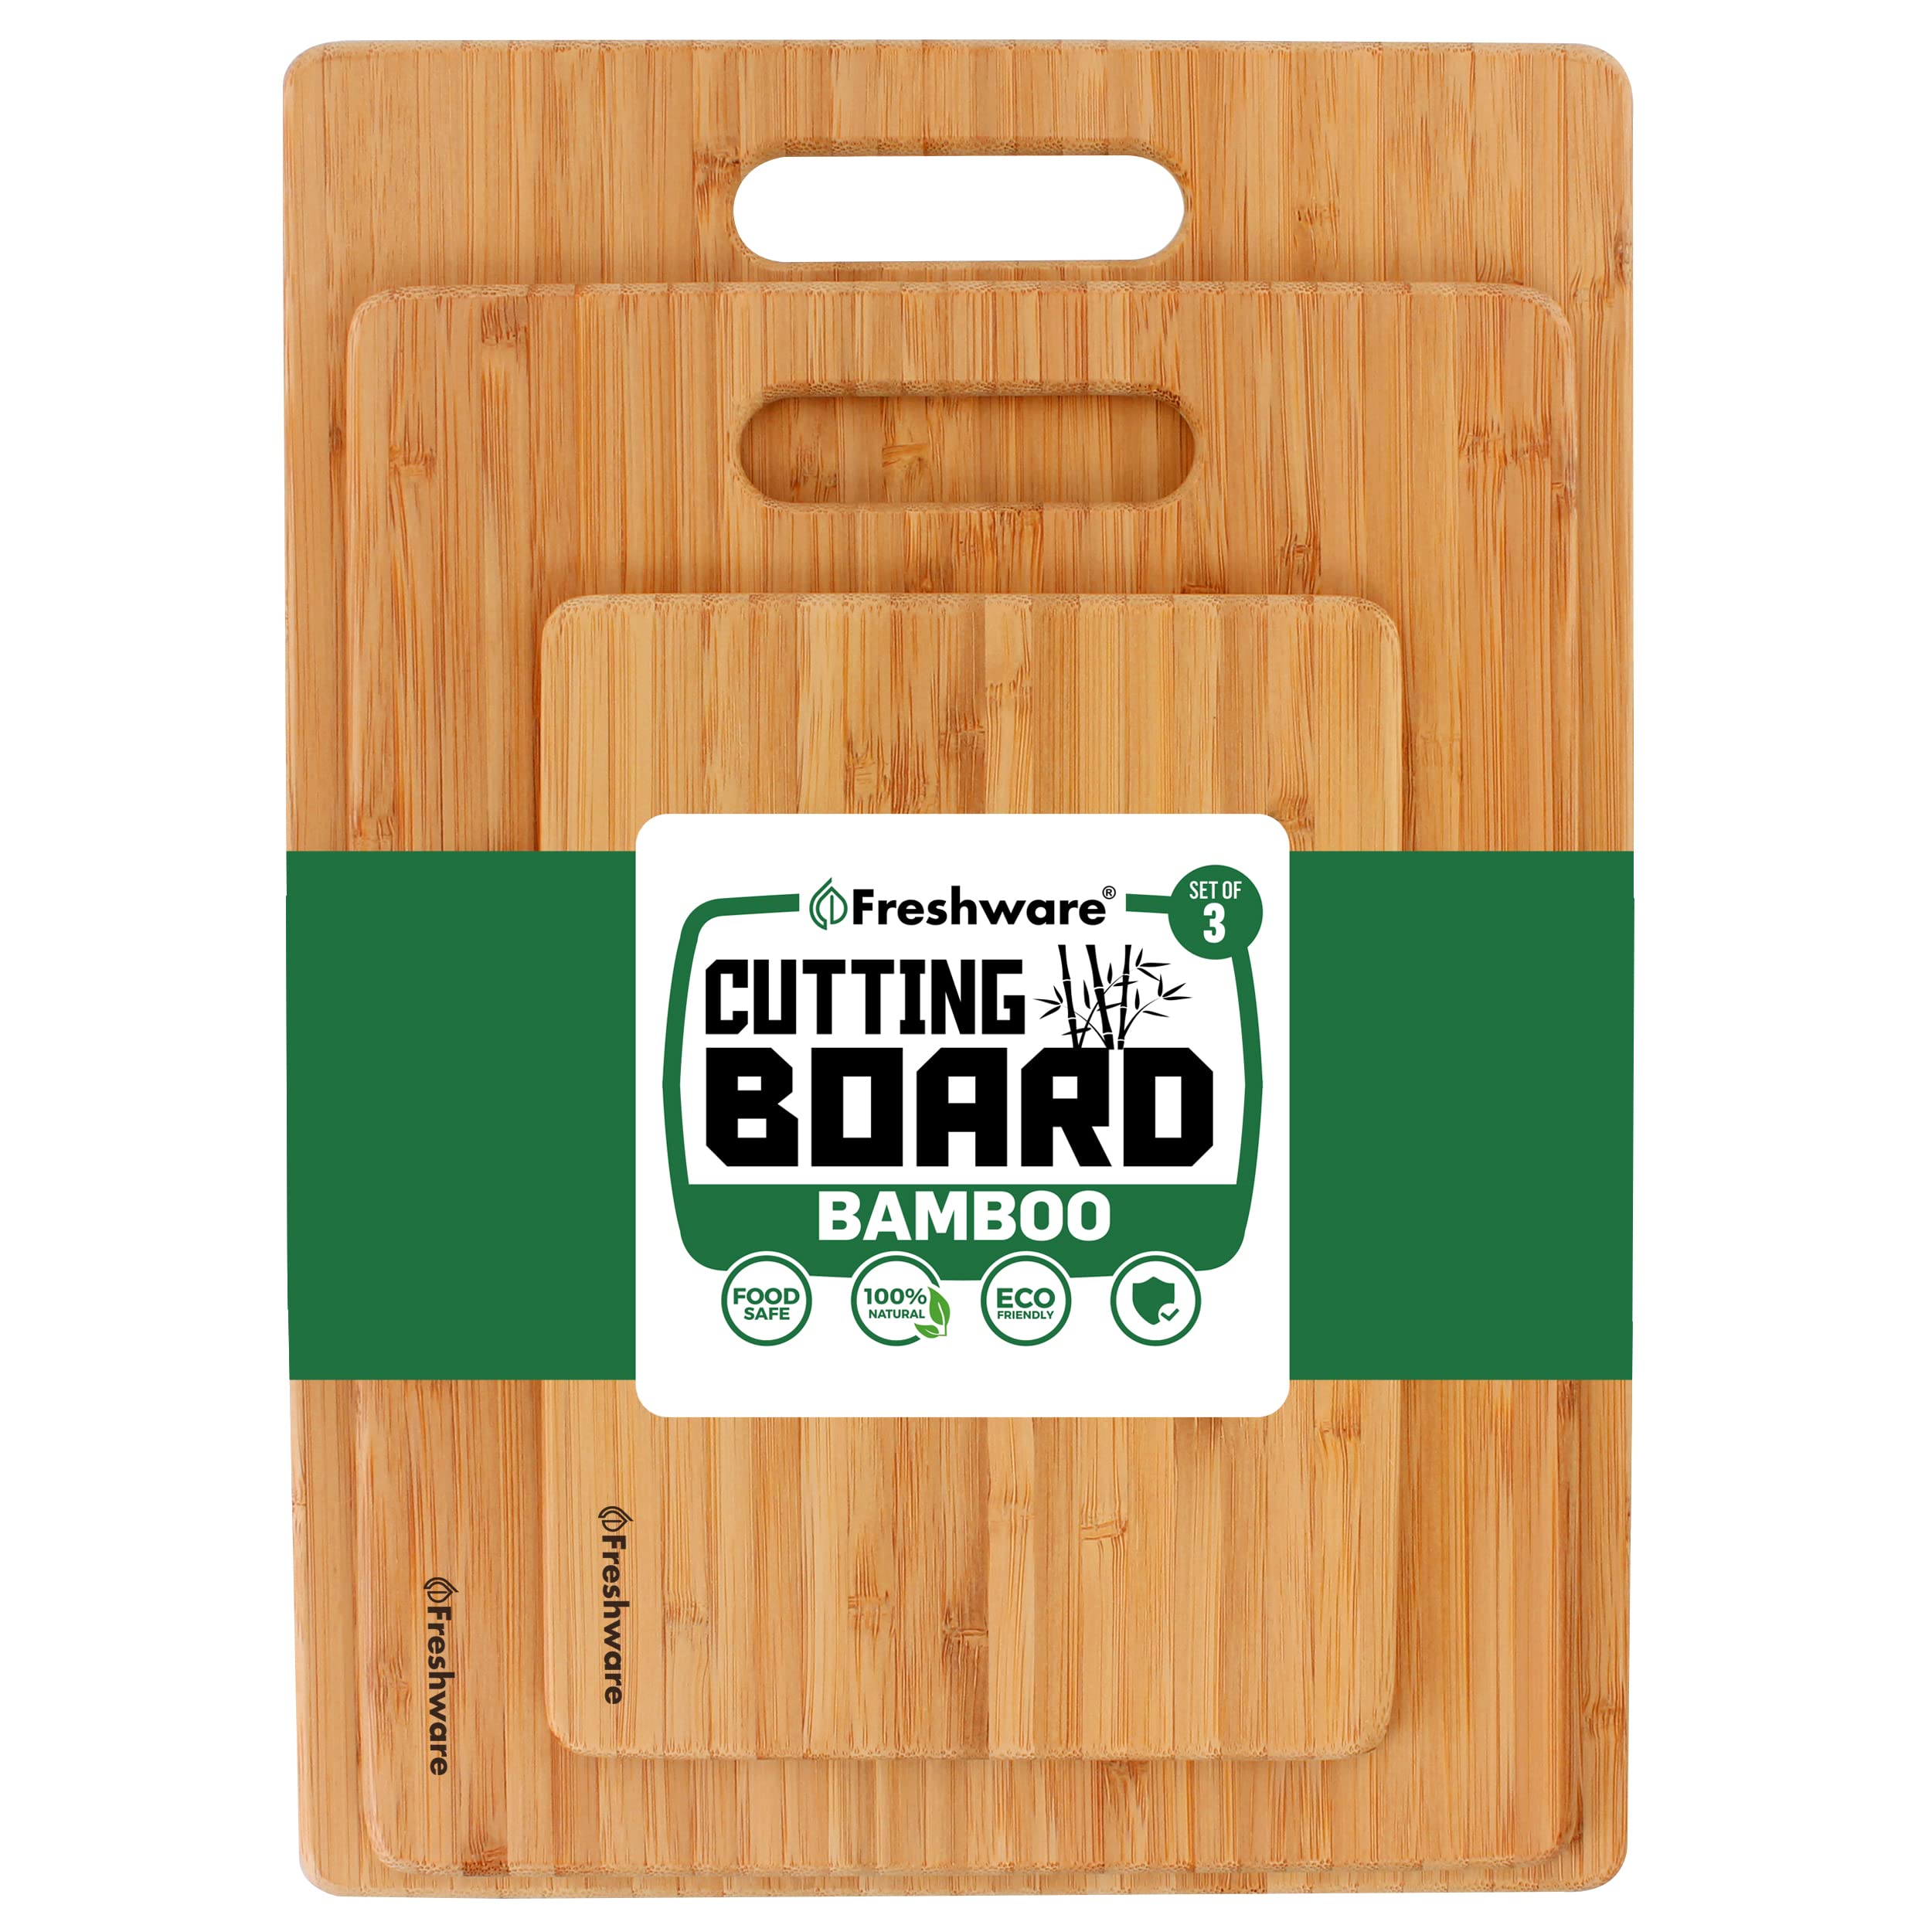 Bamboo Cutting Boards for Kitchen [Set of 3] Wood Cutting Board for Chopping Meat, Vegetables, Fruits, Cheese, Knife Friendly Serving Tray with Handles